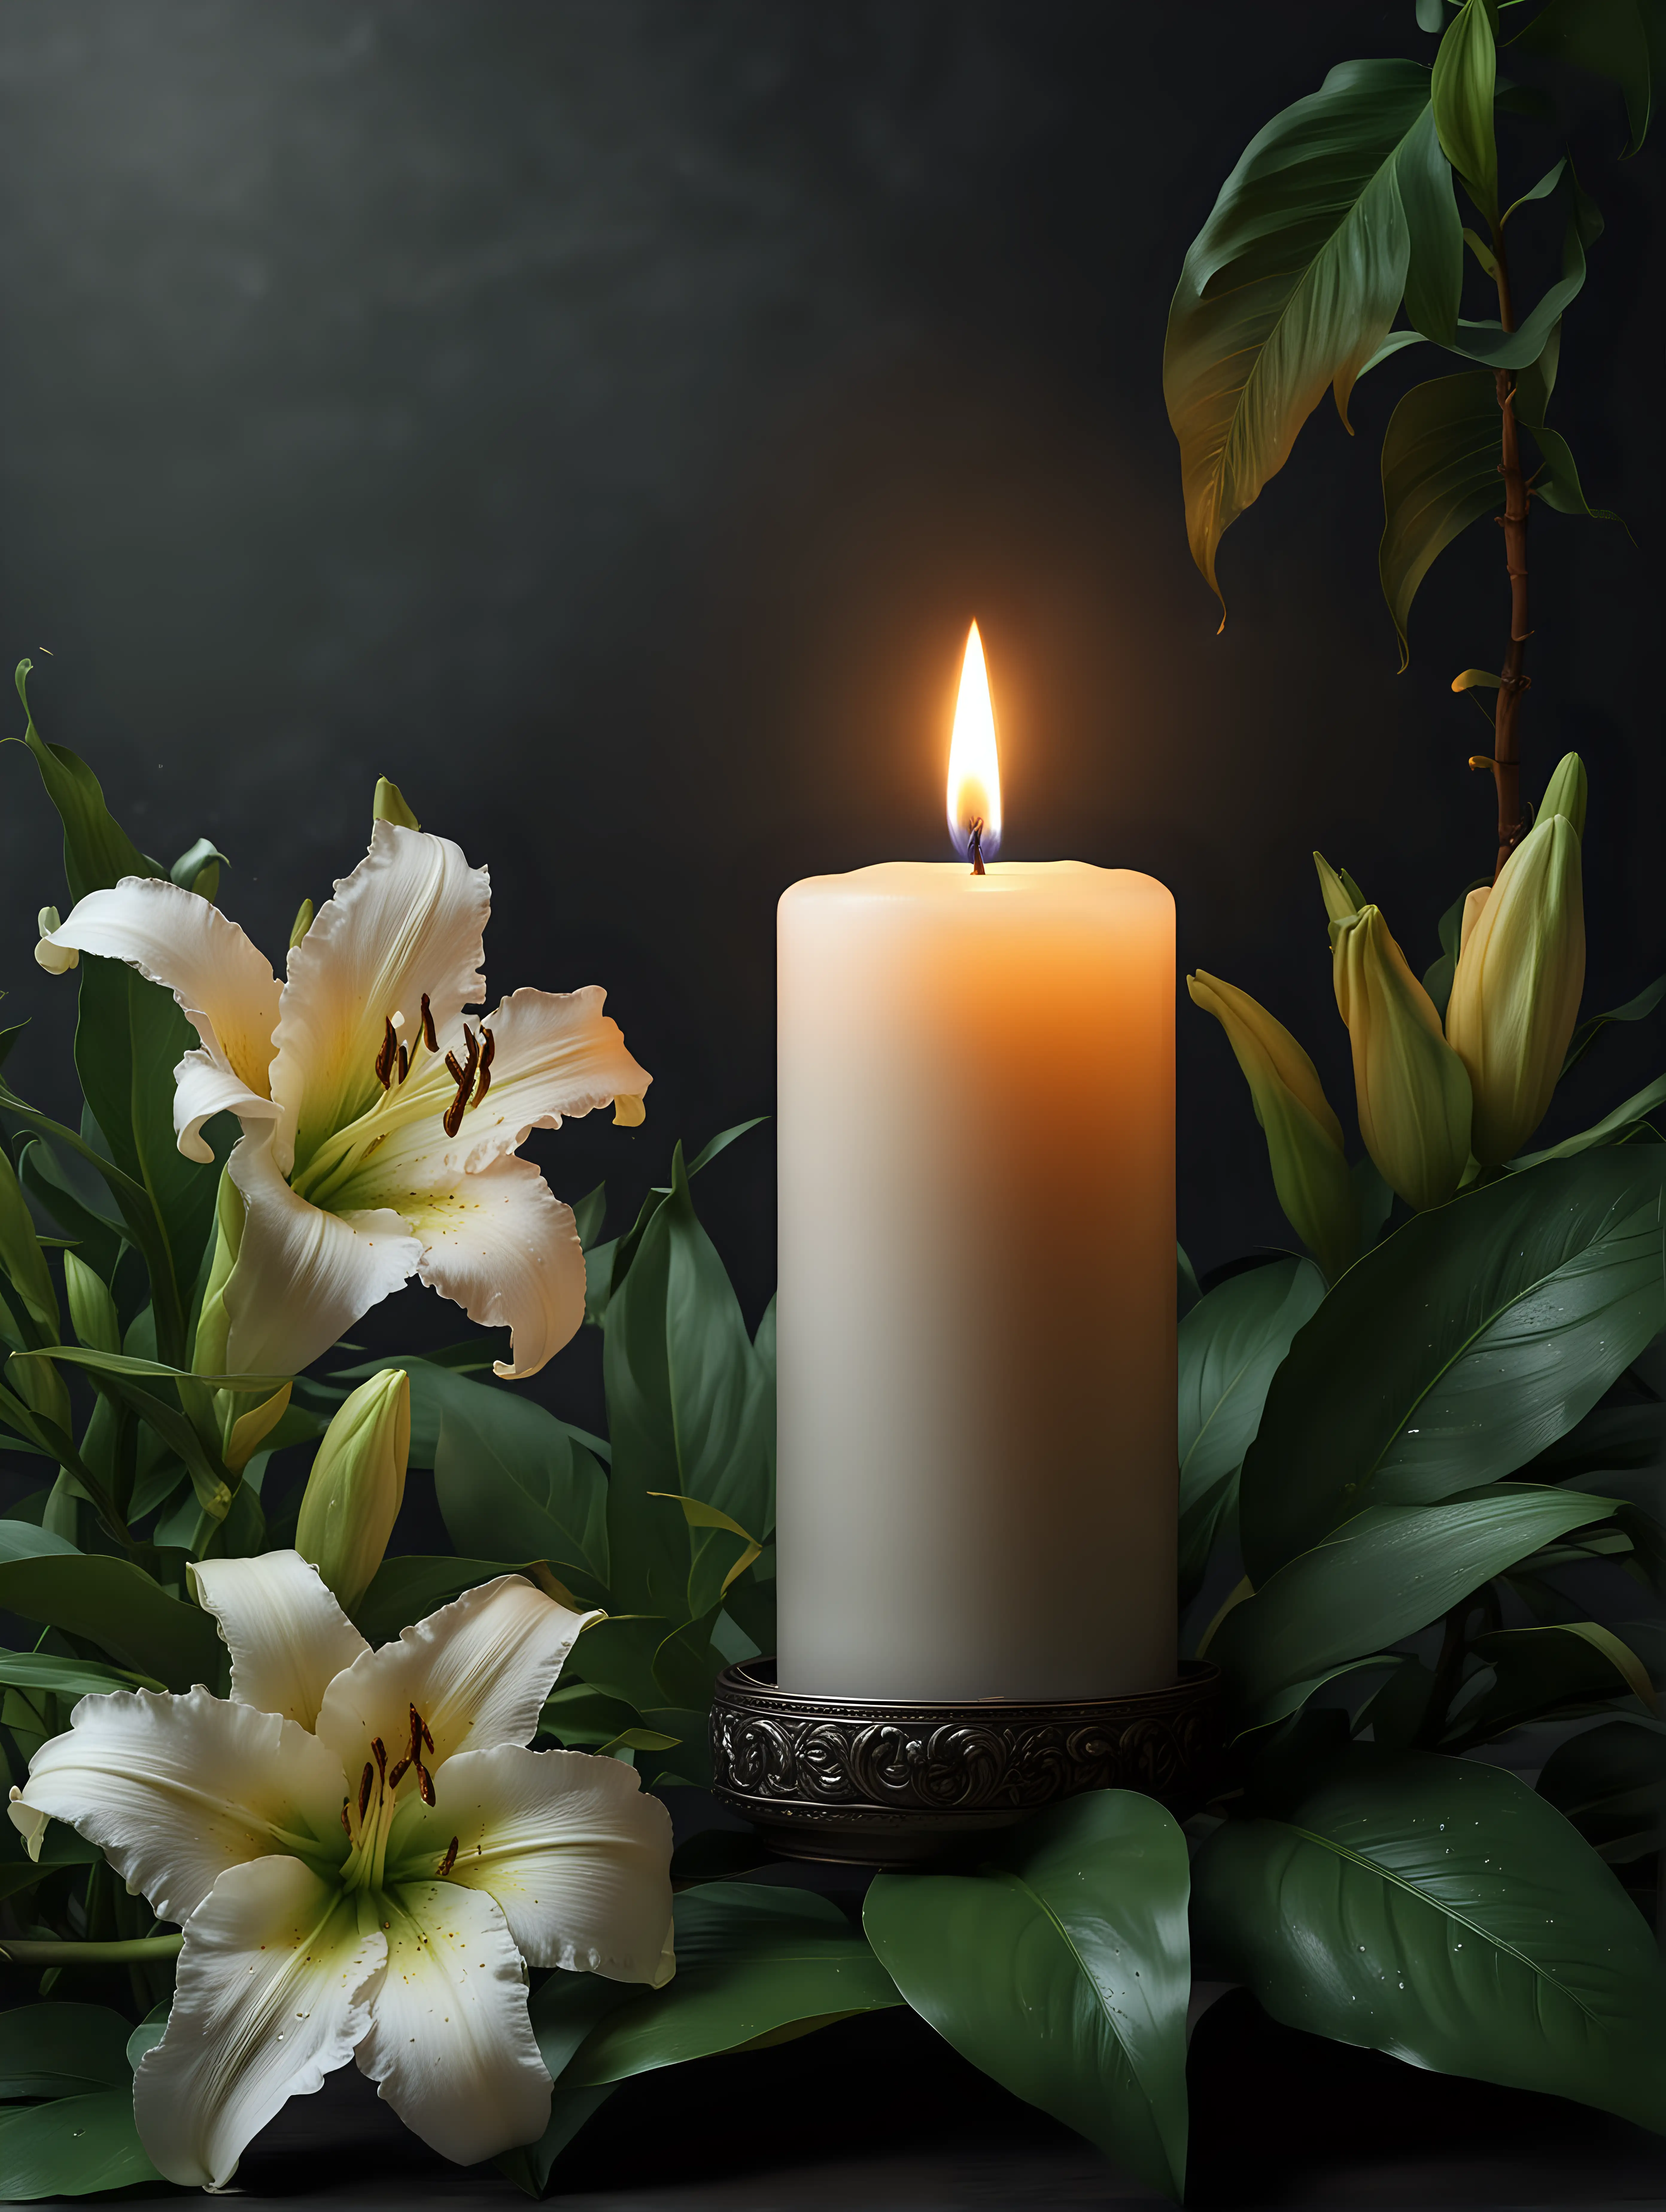 Hyperrealistic Candle and Lily Branch in Dark Floral Setting